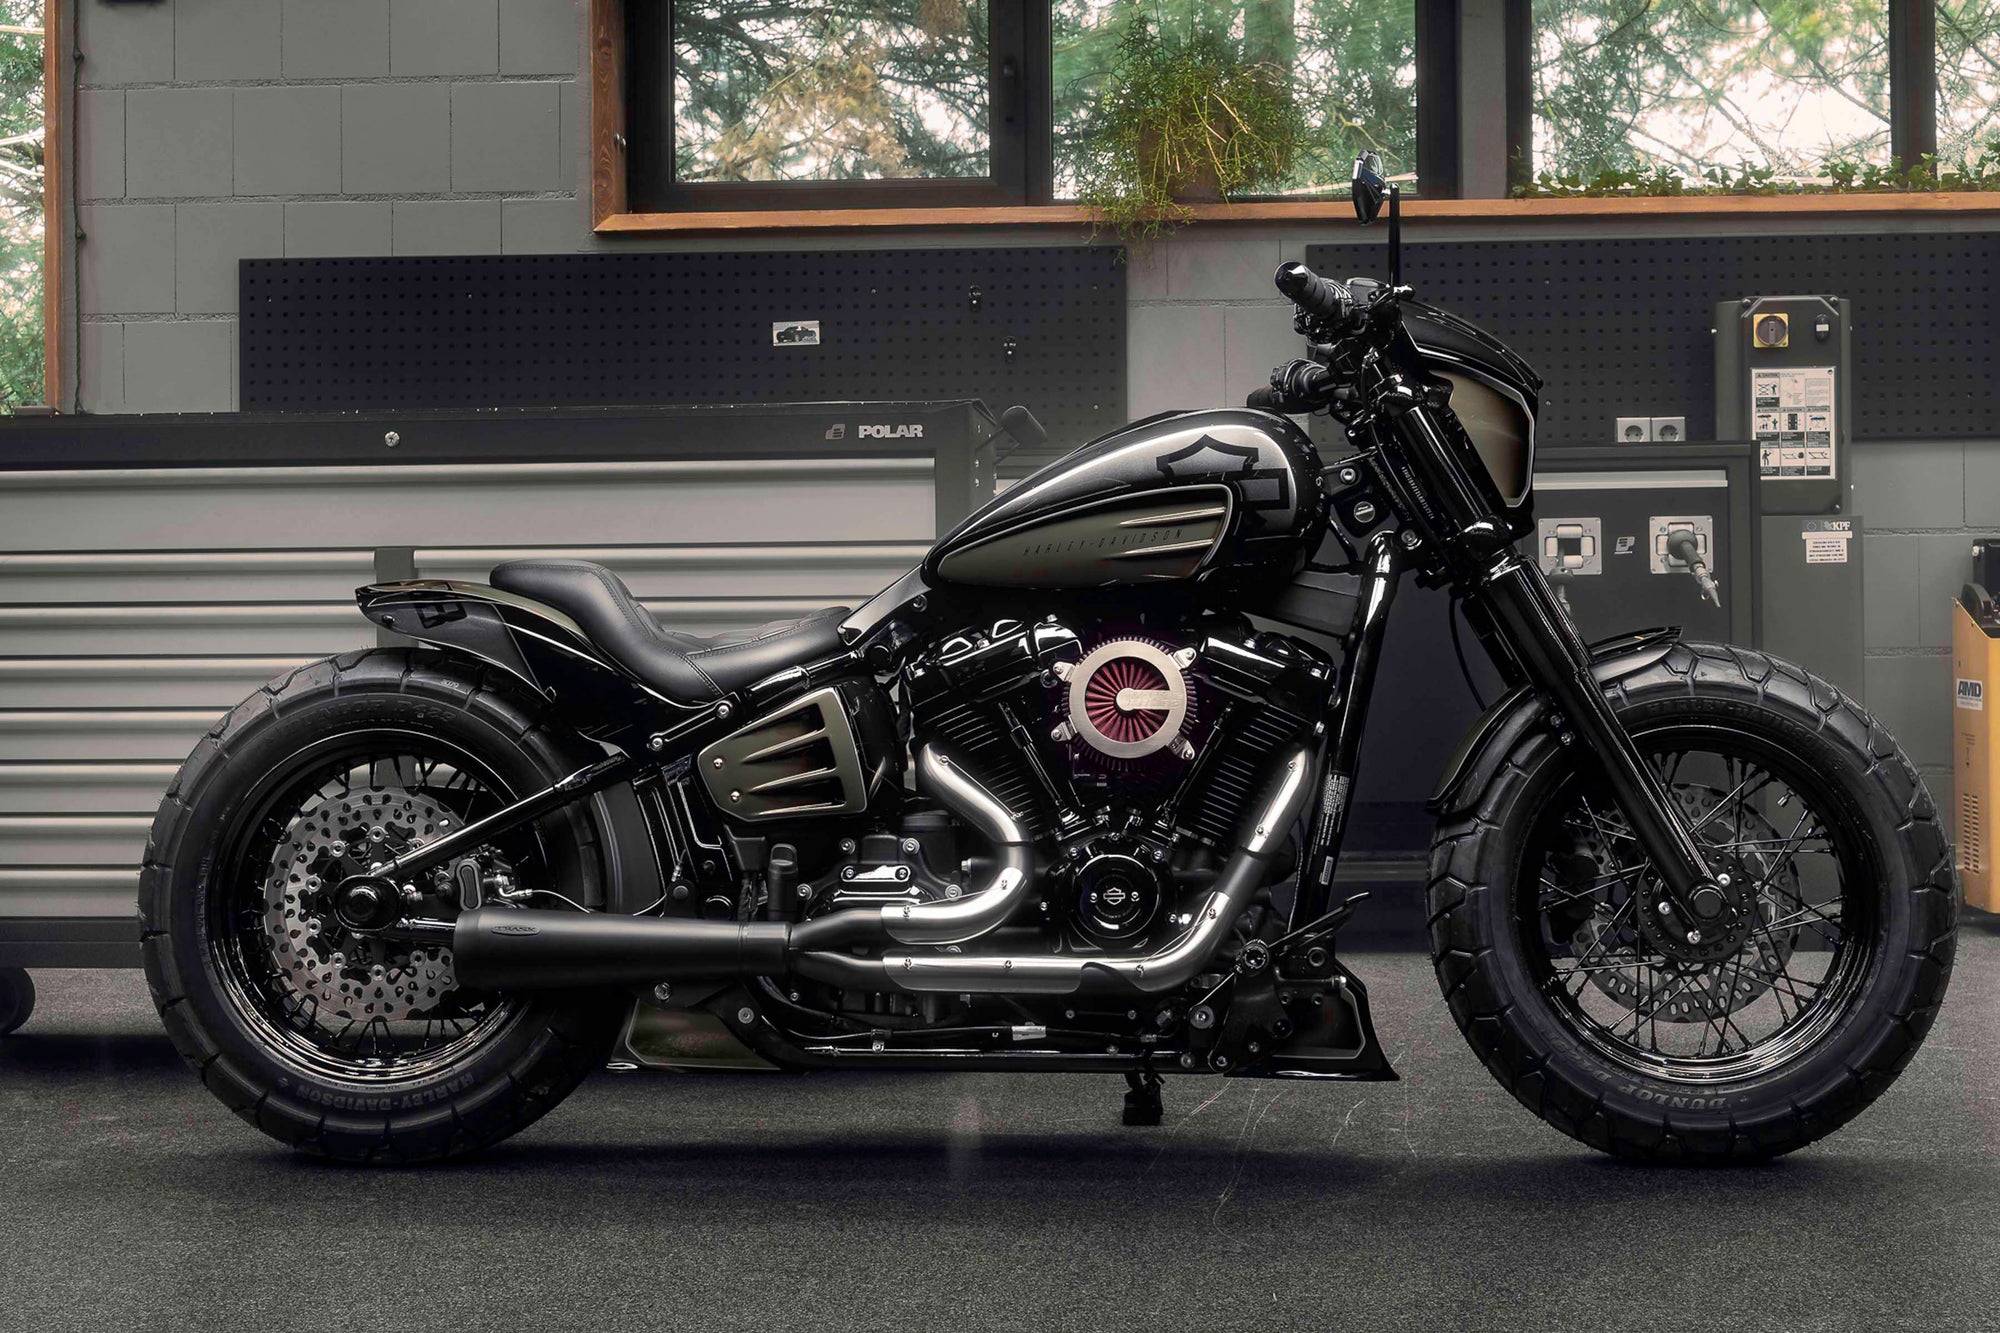 Modified Harley Davidson Street Bob motorcycle with Killer Custom parts from the side in a modern garage